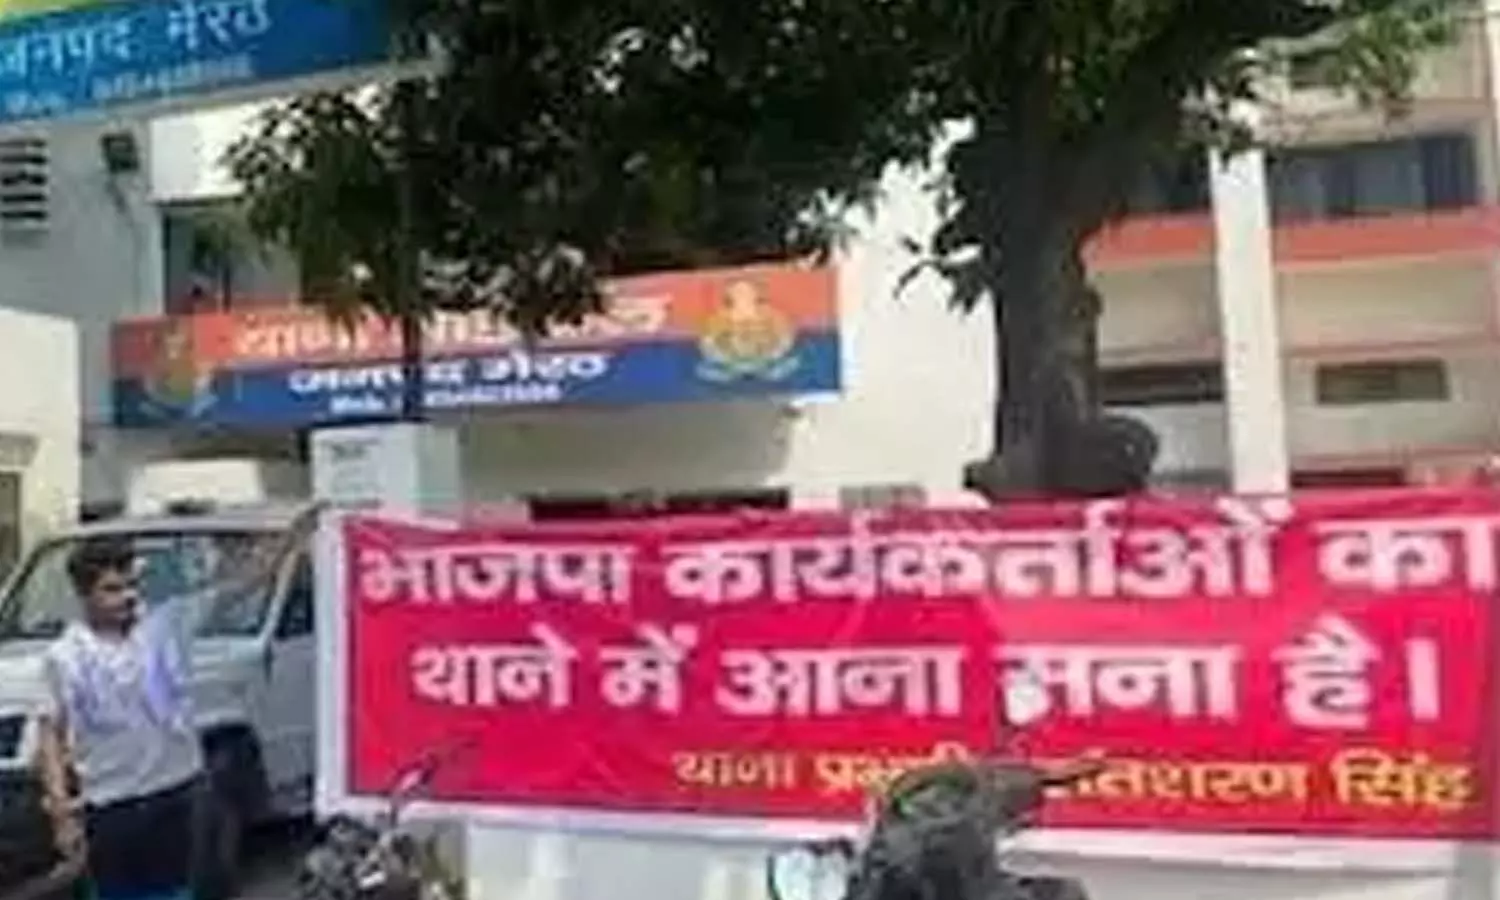 Police arrested so-called BJP leaders who put up objectionable banners in Meerut Medical Station